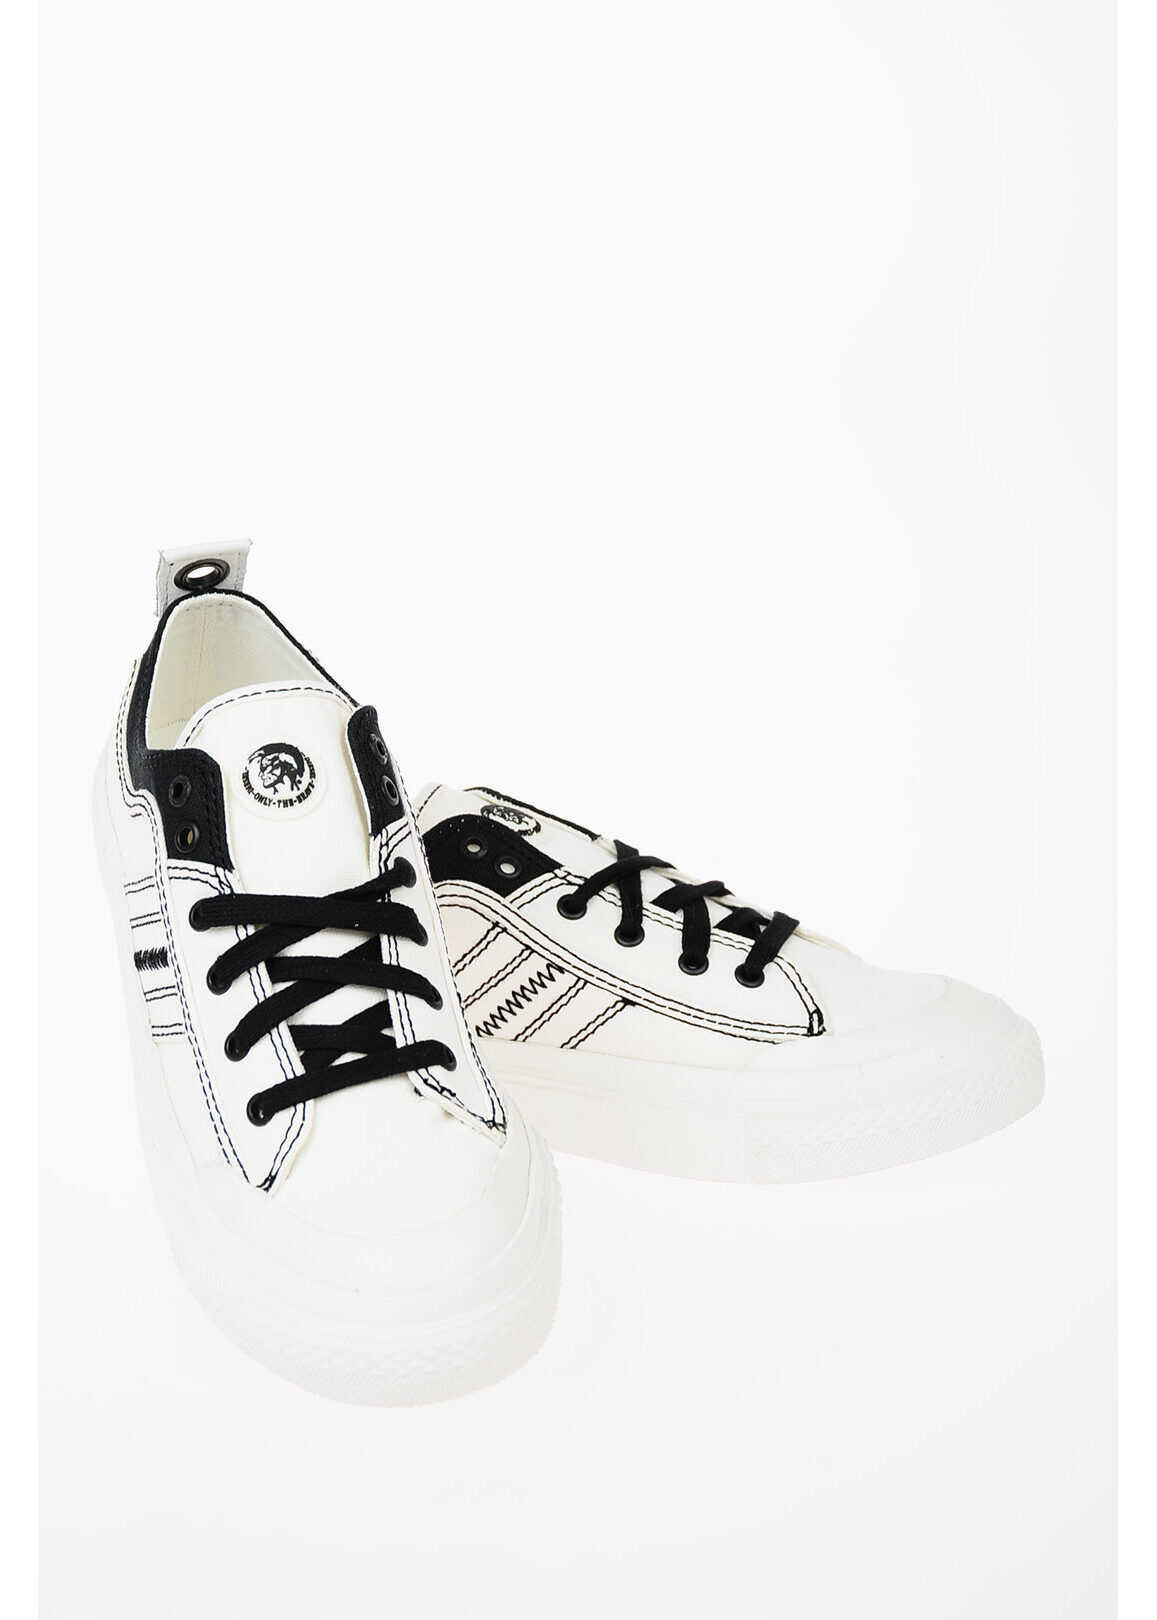 Diesel Fabric ASTICO S-ASTICO LOW LACE Sneakers* BLACK & WHITE